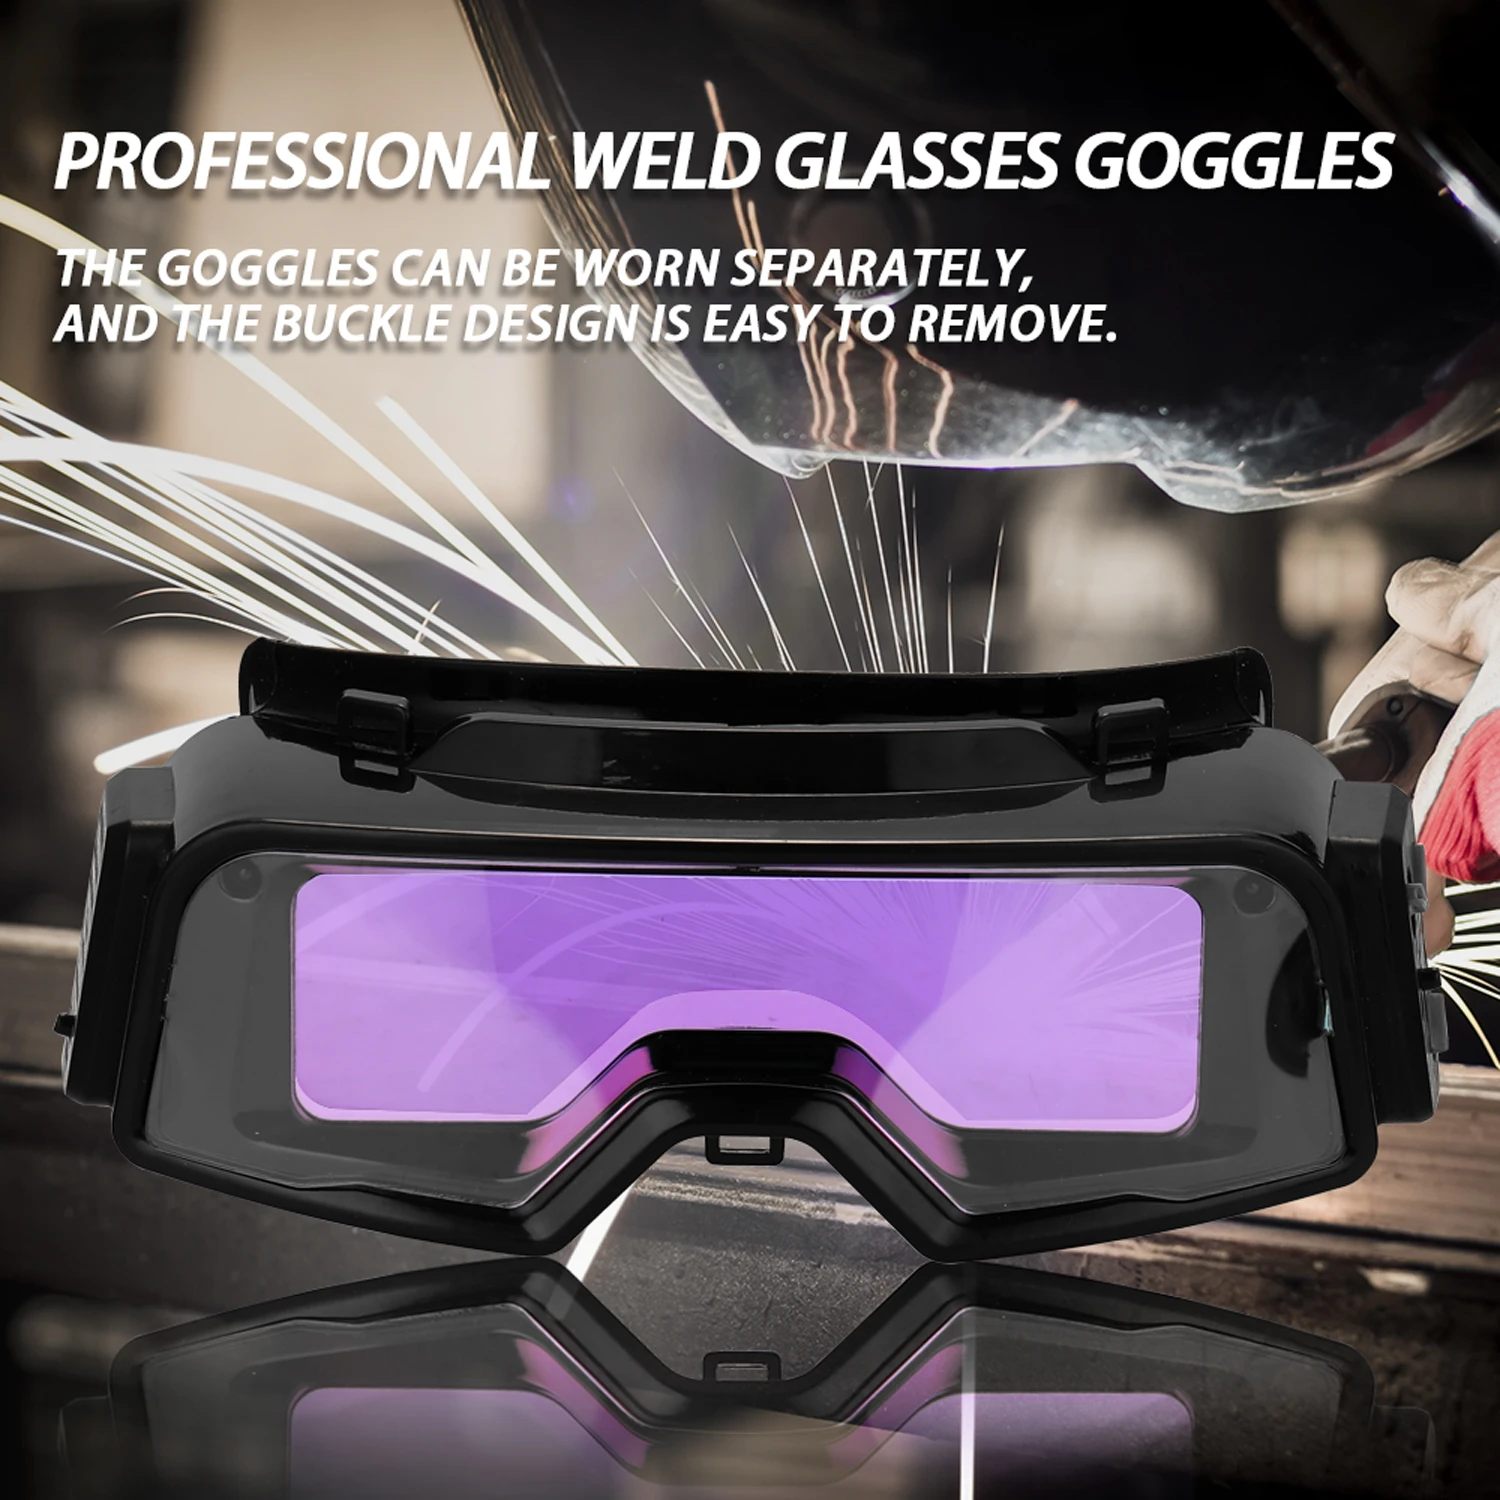 cheap welding helmets Auto Darkening Welding Goggles for TIG MIG MMA Professional Weld Glasses Goggles Multifunction Utility Tool best welding rod for beginners